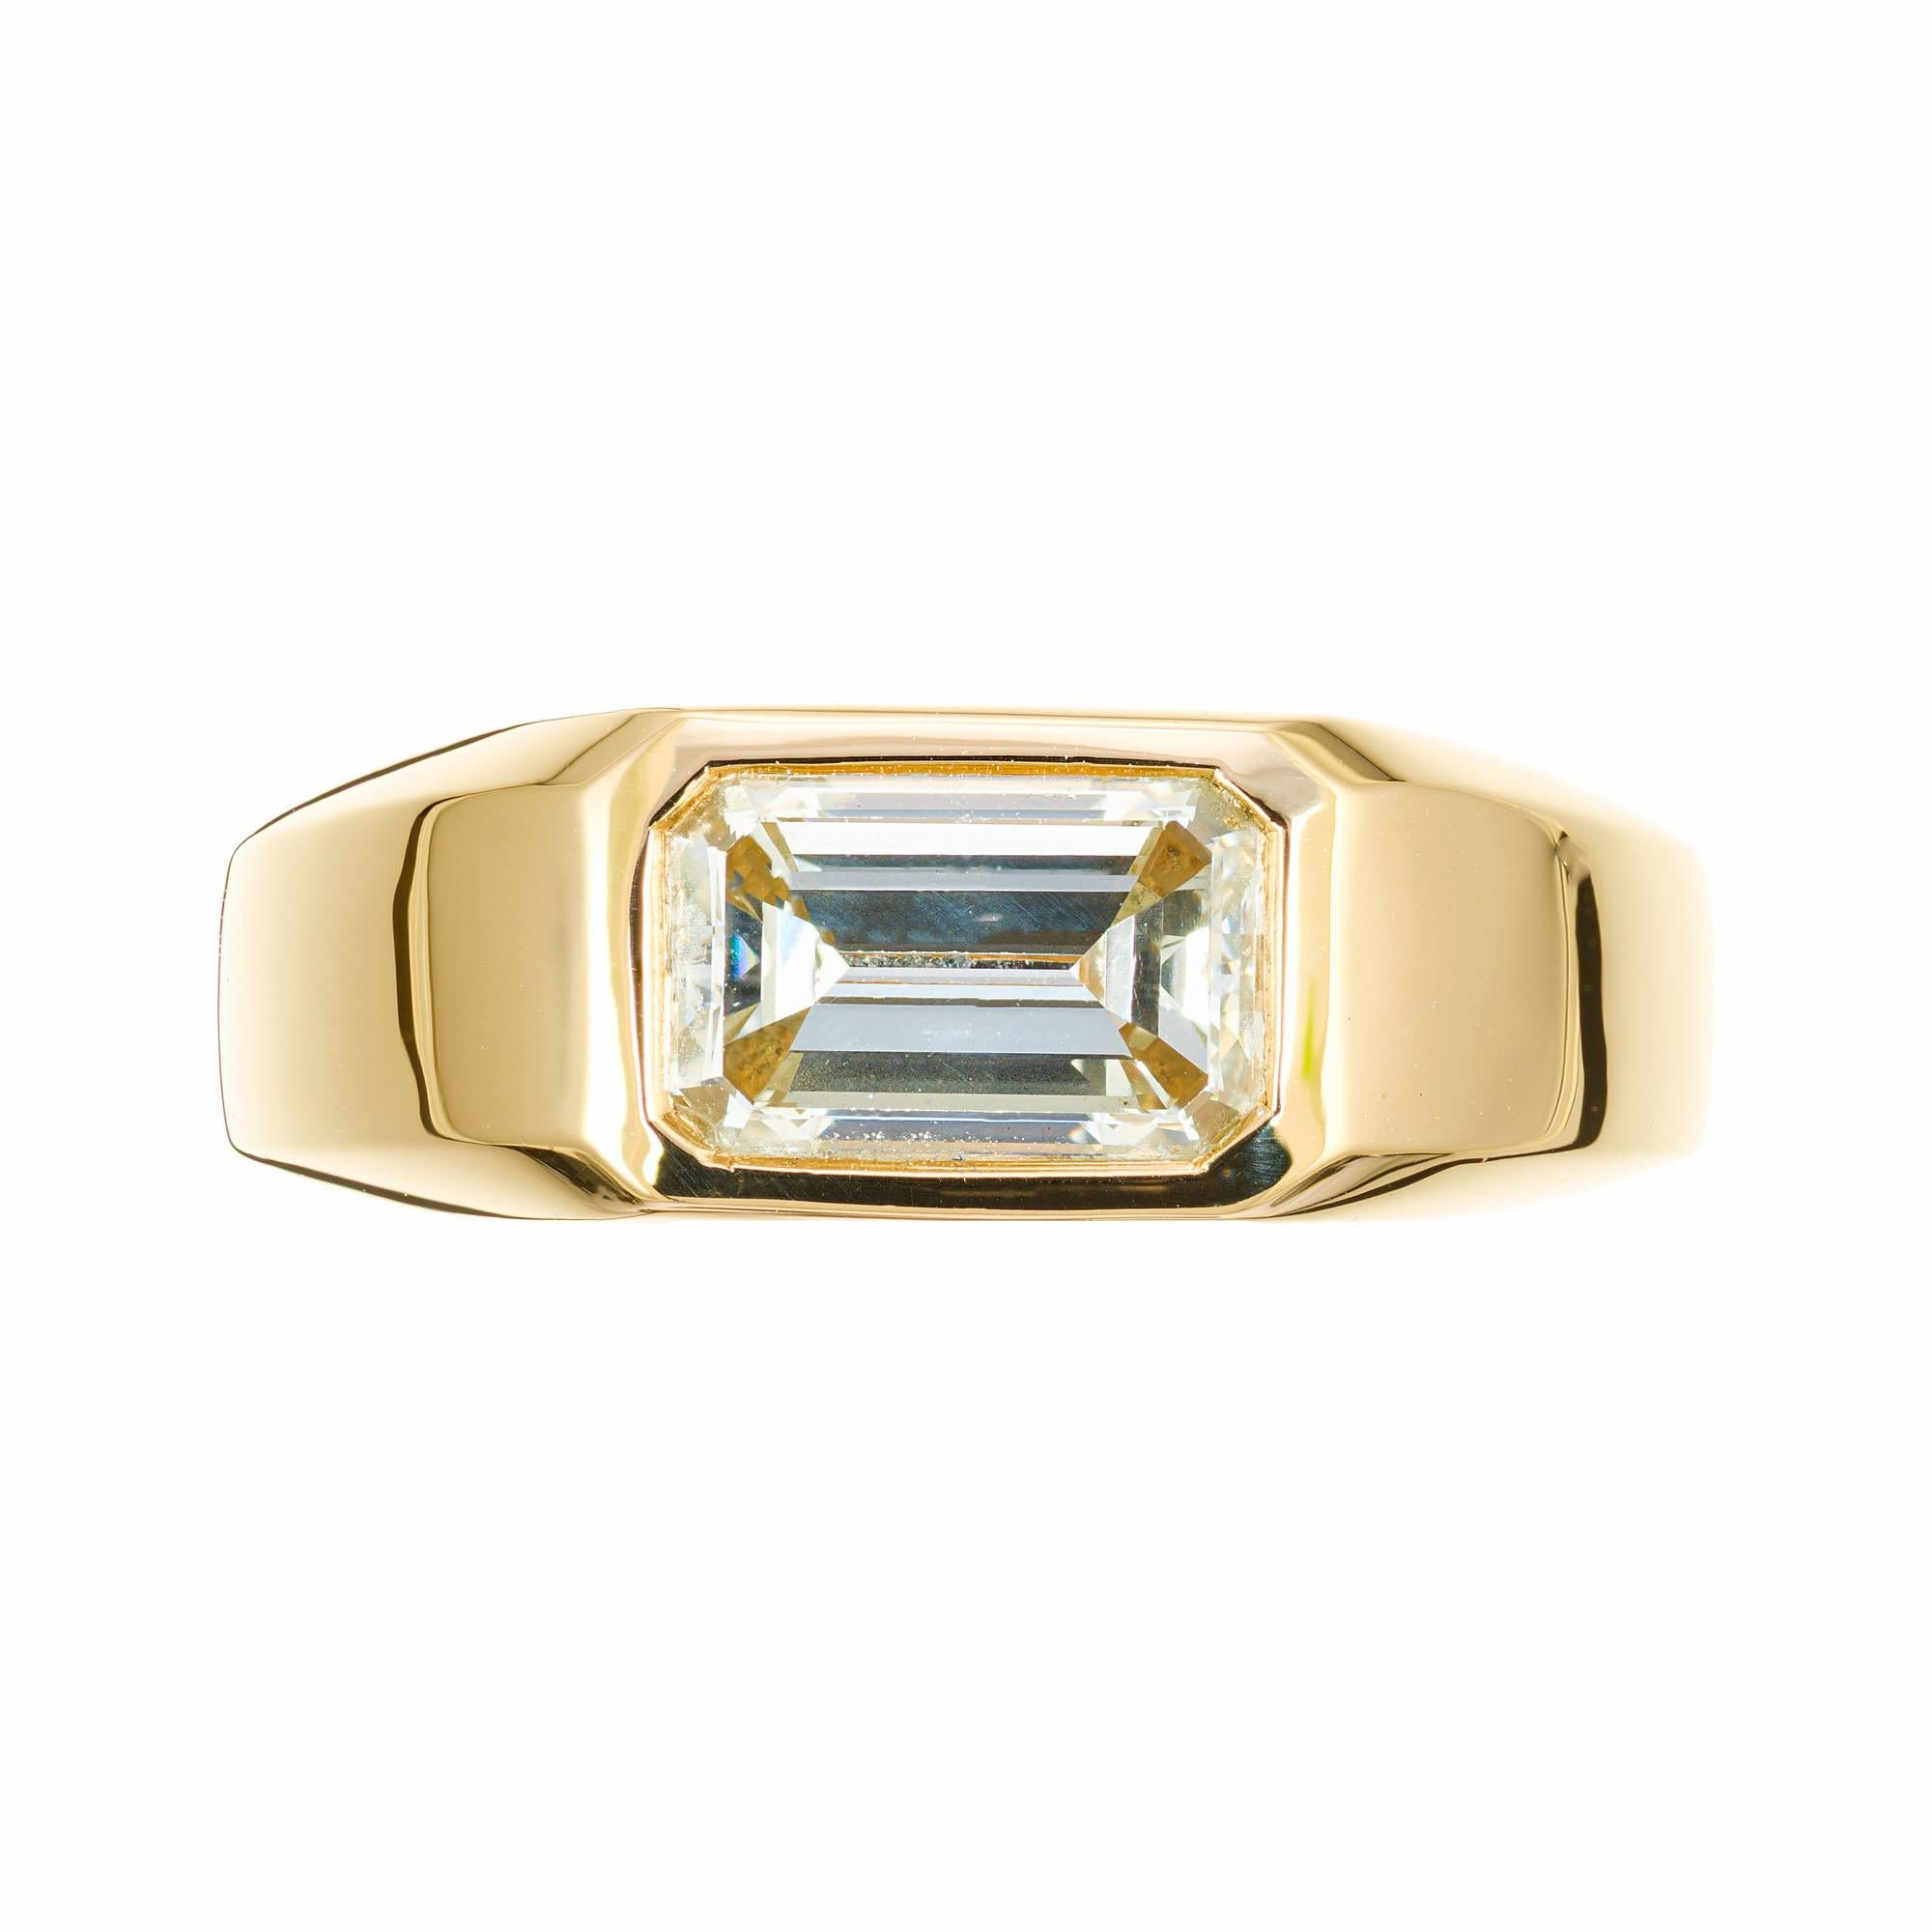 Unisex Emerald cut diamond ring. Custom made solid 18k yellow gold setting with a GIA Certified 1.80ct emerald cut center diamond.

1 Emerald cut diamond, M VS approx. 1.80cts GIA Certificate # 5212496390
Size: 7.75 and sizable 
18k yellow gold